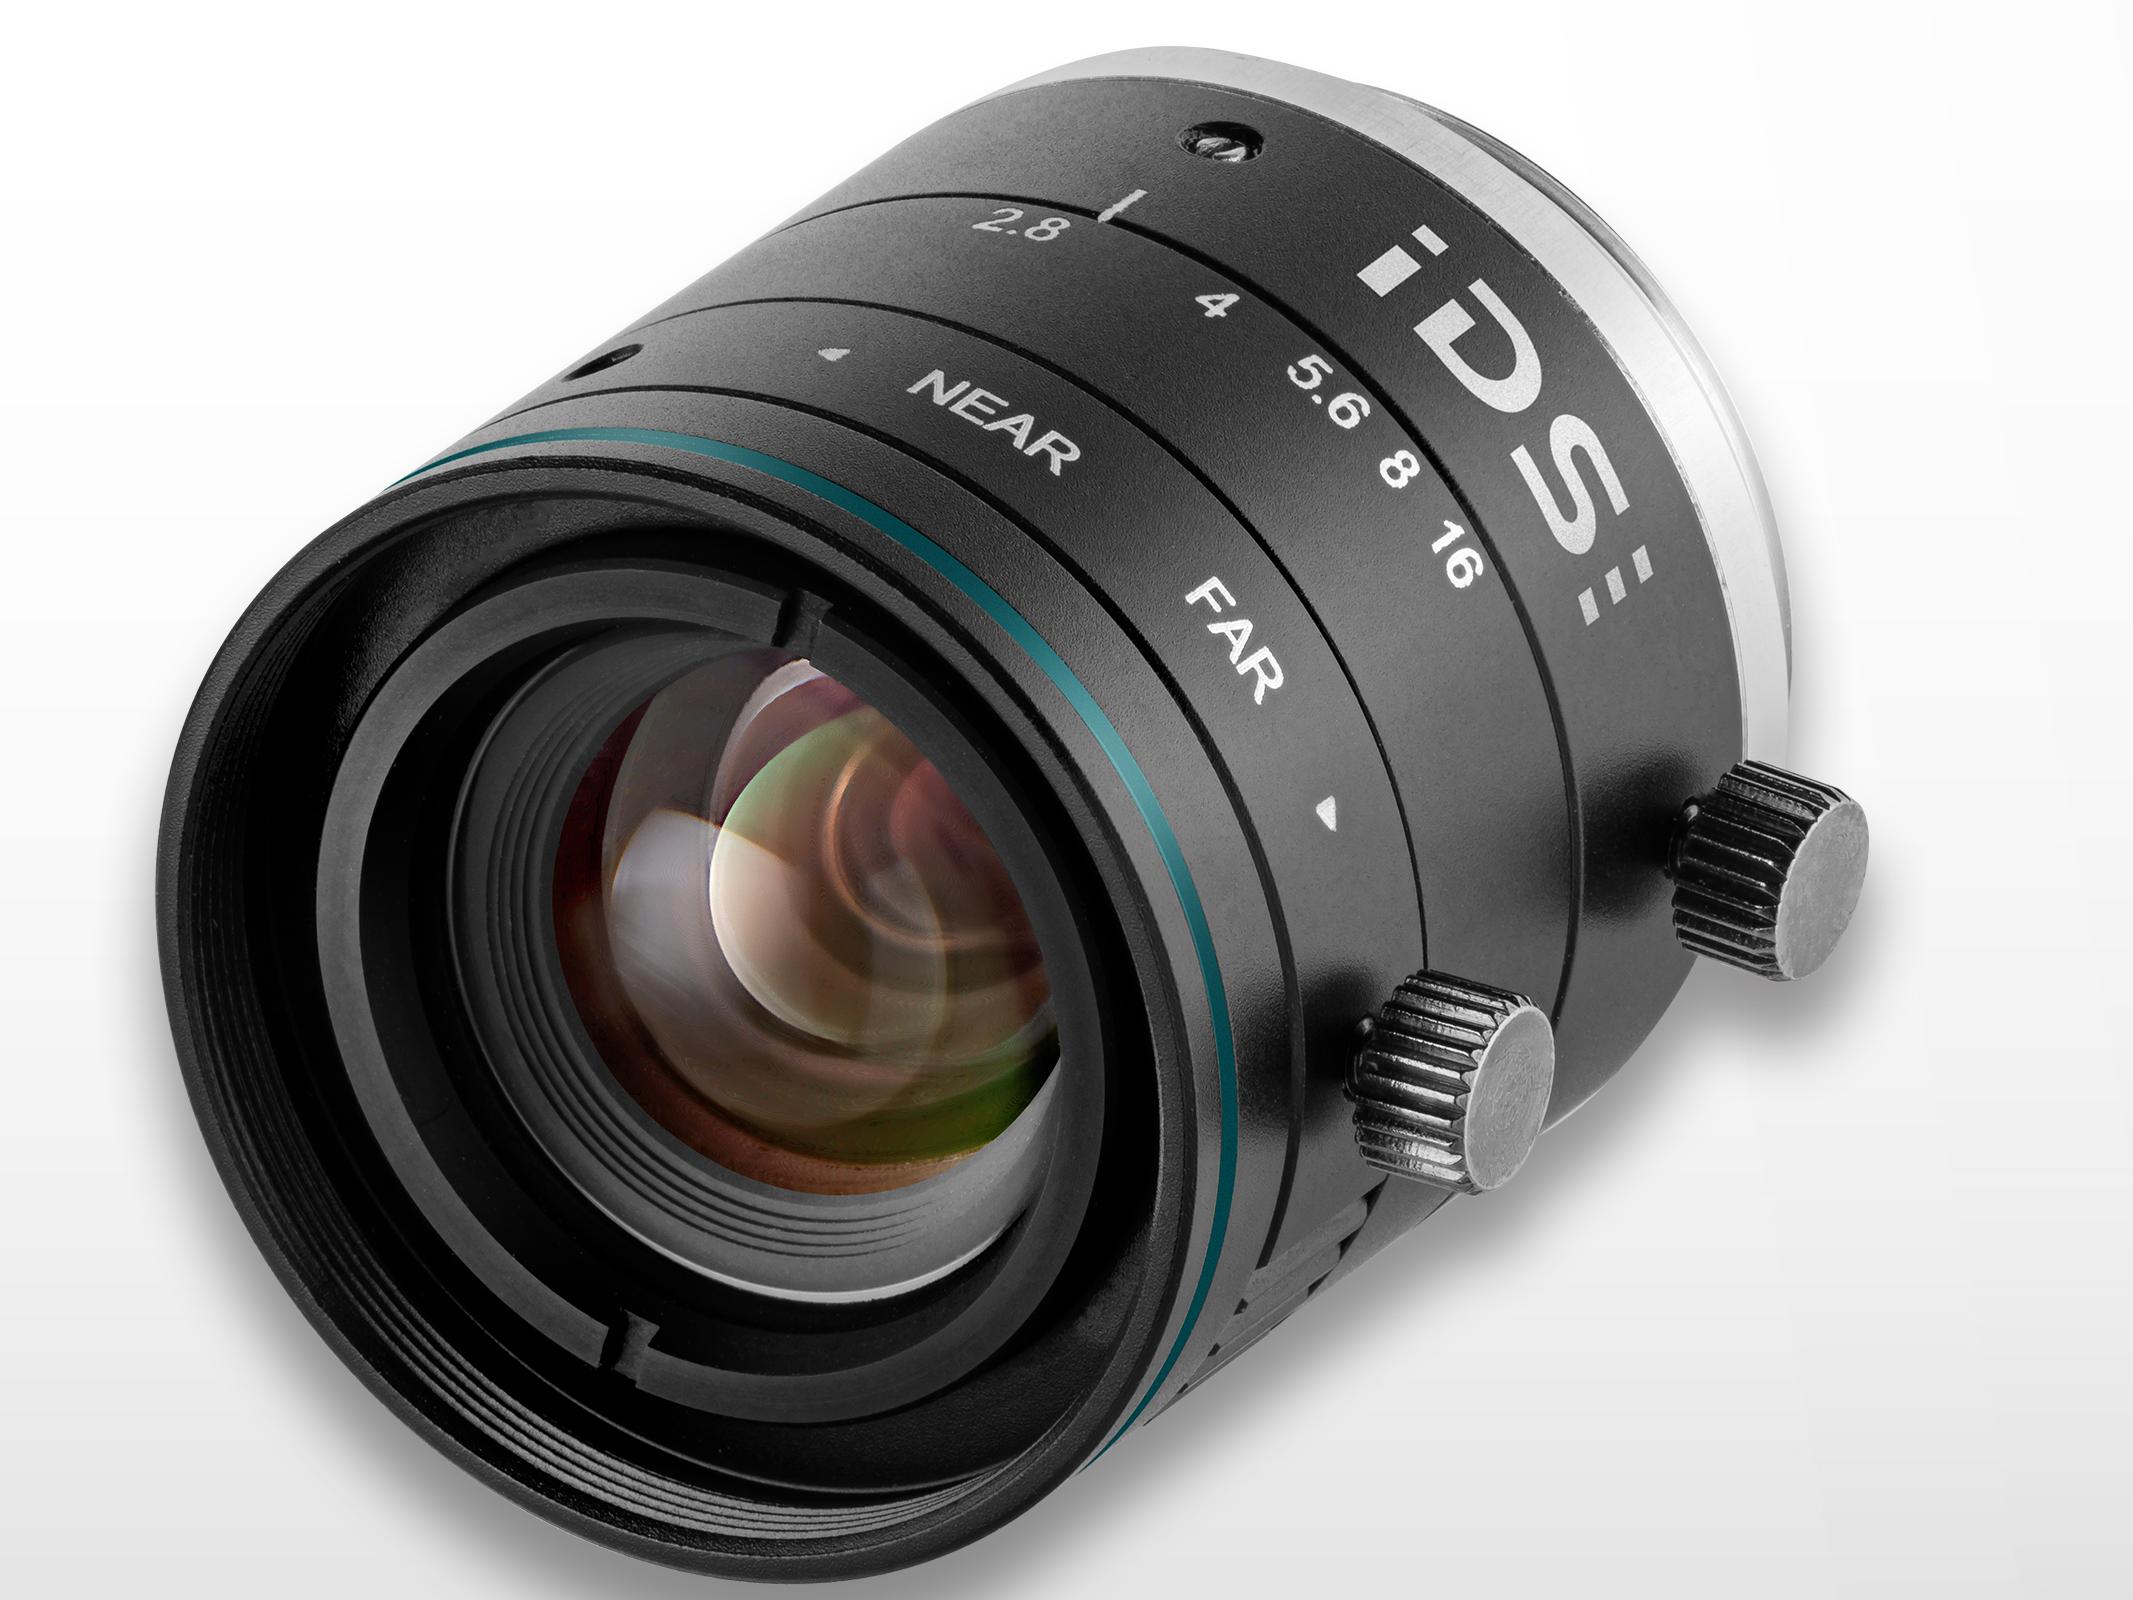 New C-Mount lenses bring focus for machine and system builders